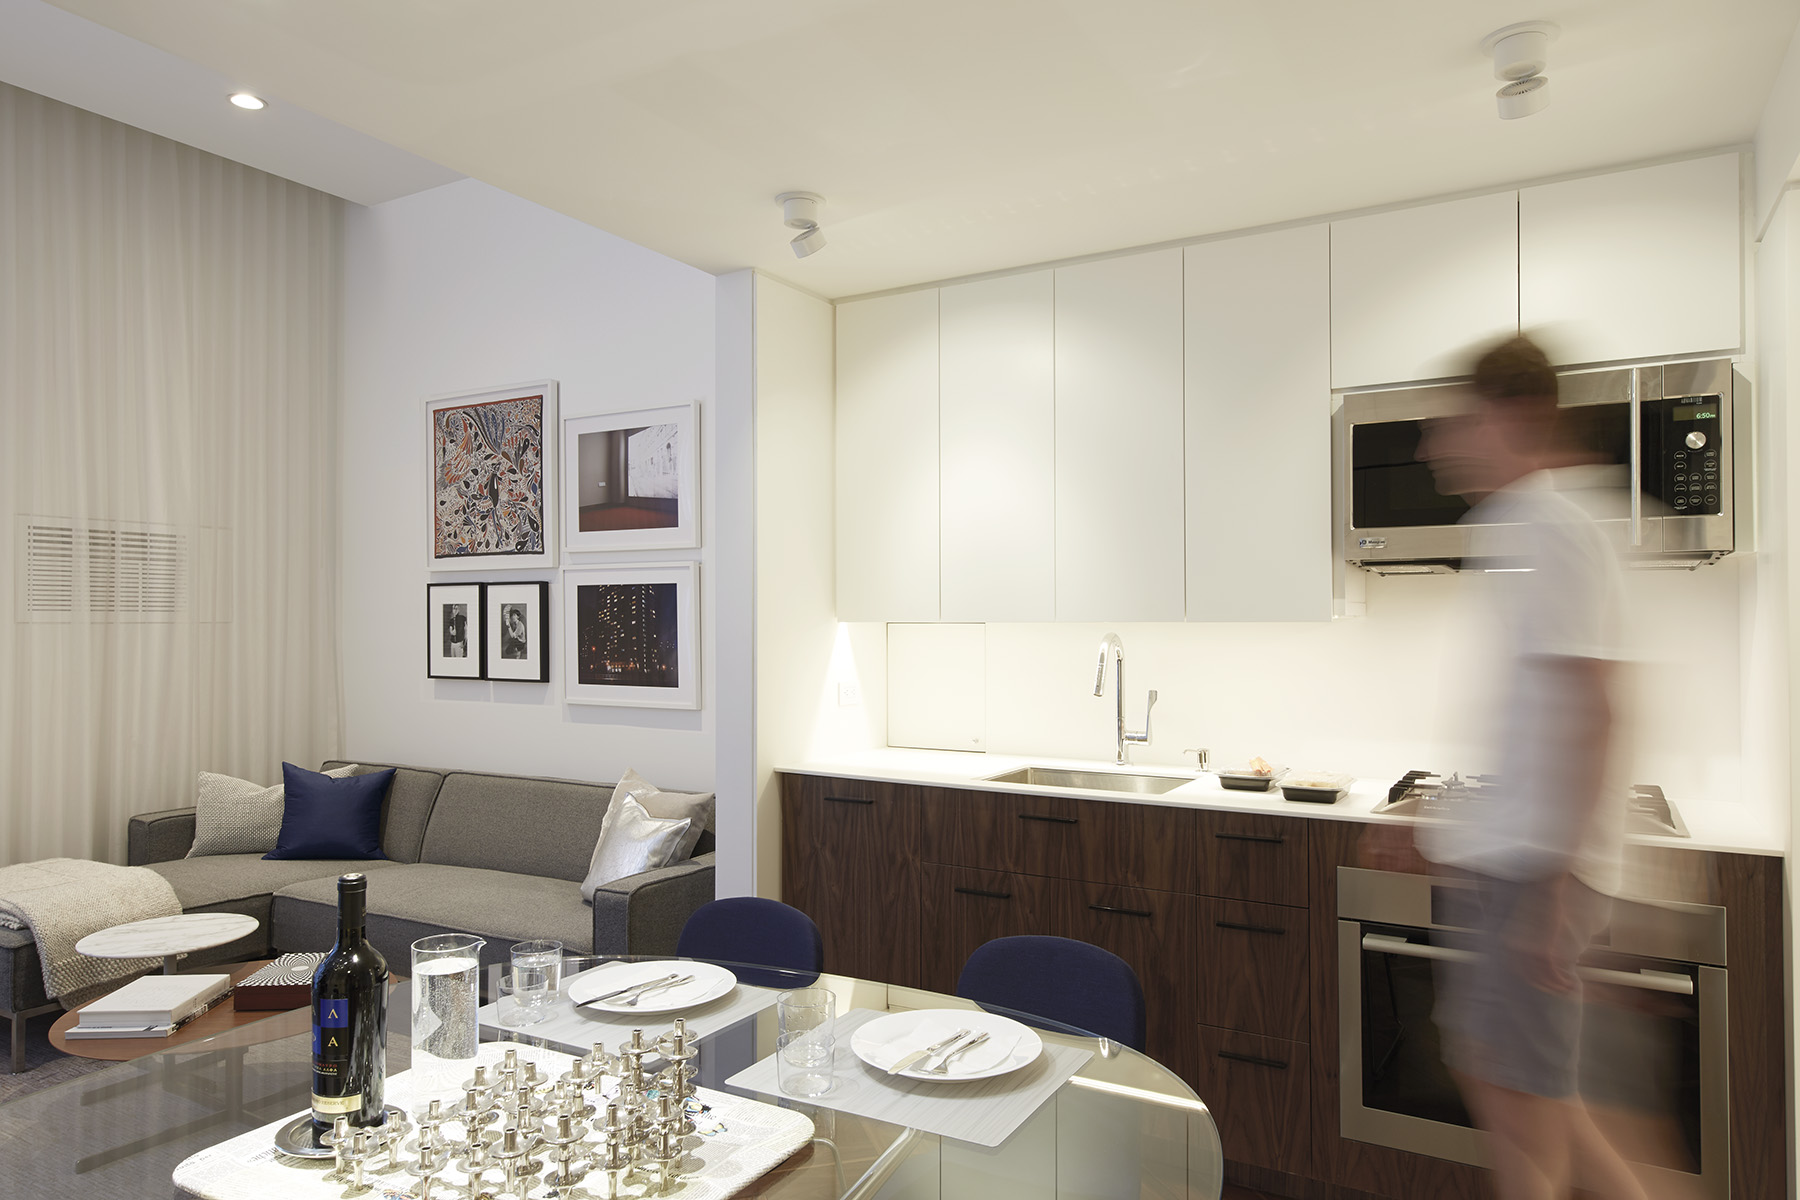 STADT Architecture, Gramercy Apartment, Walnut, Cappellini, Miele, STADT, nyc architects, ny apartment renovation